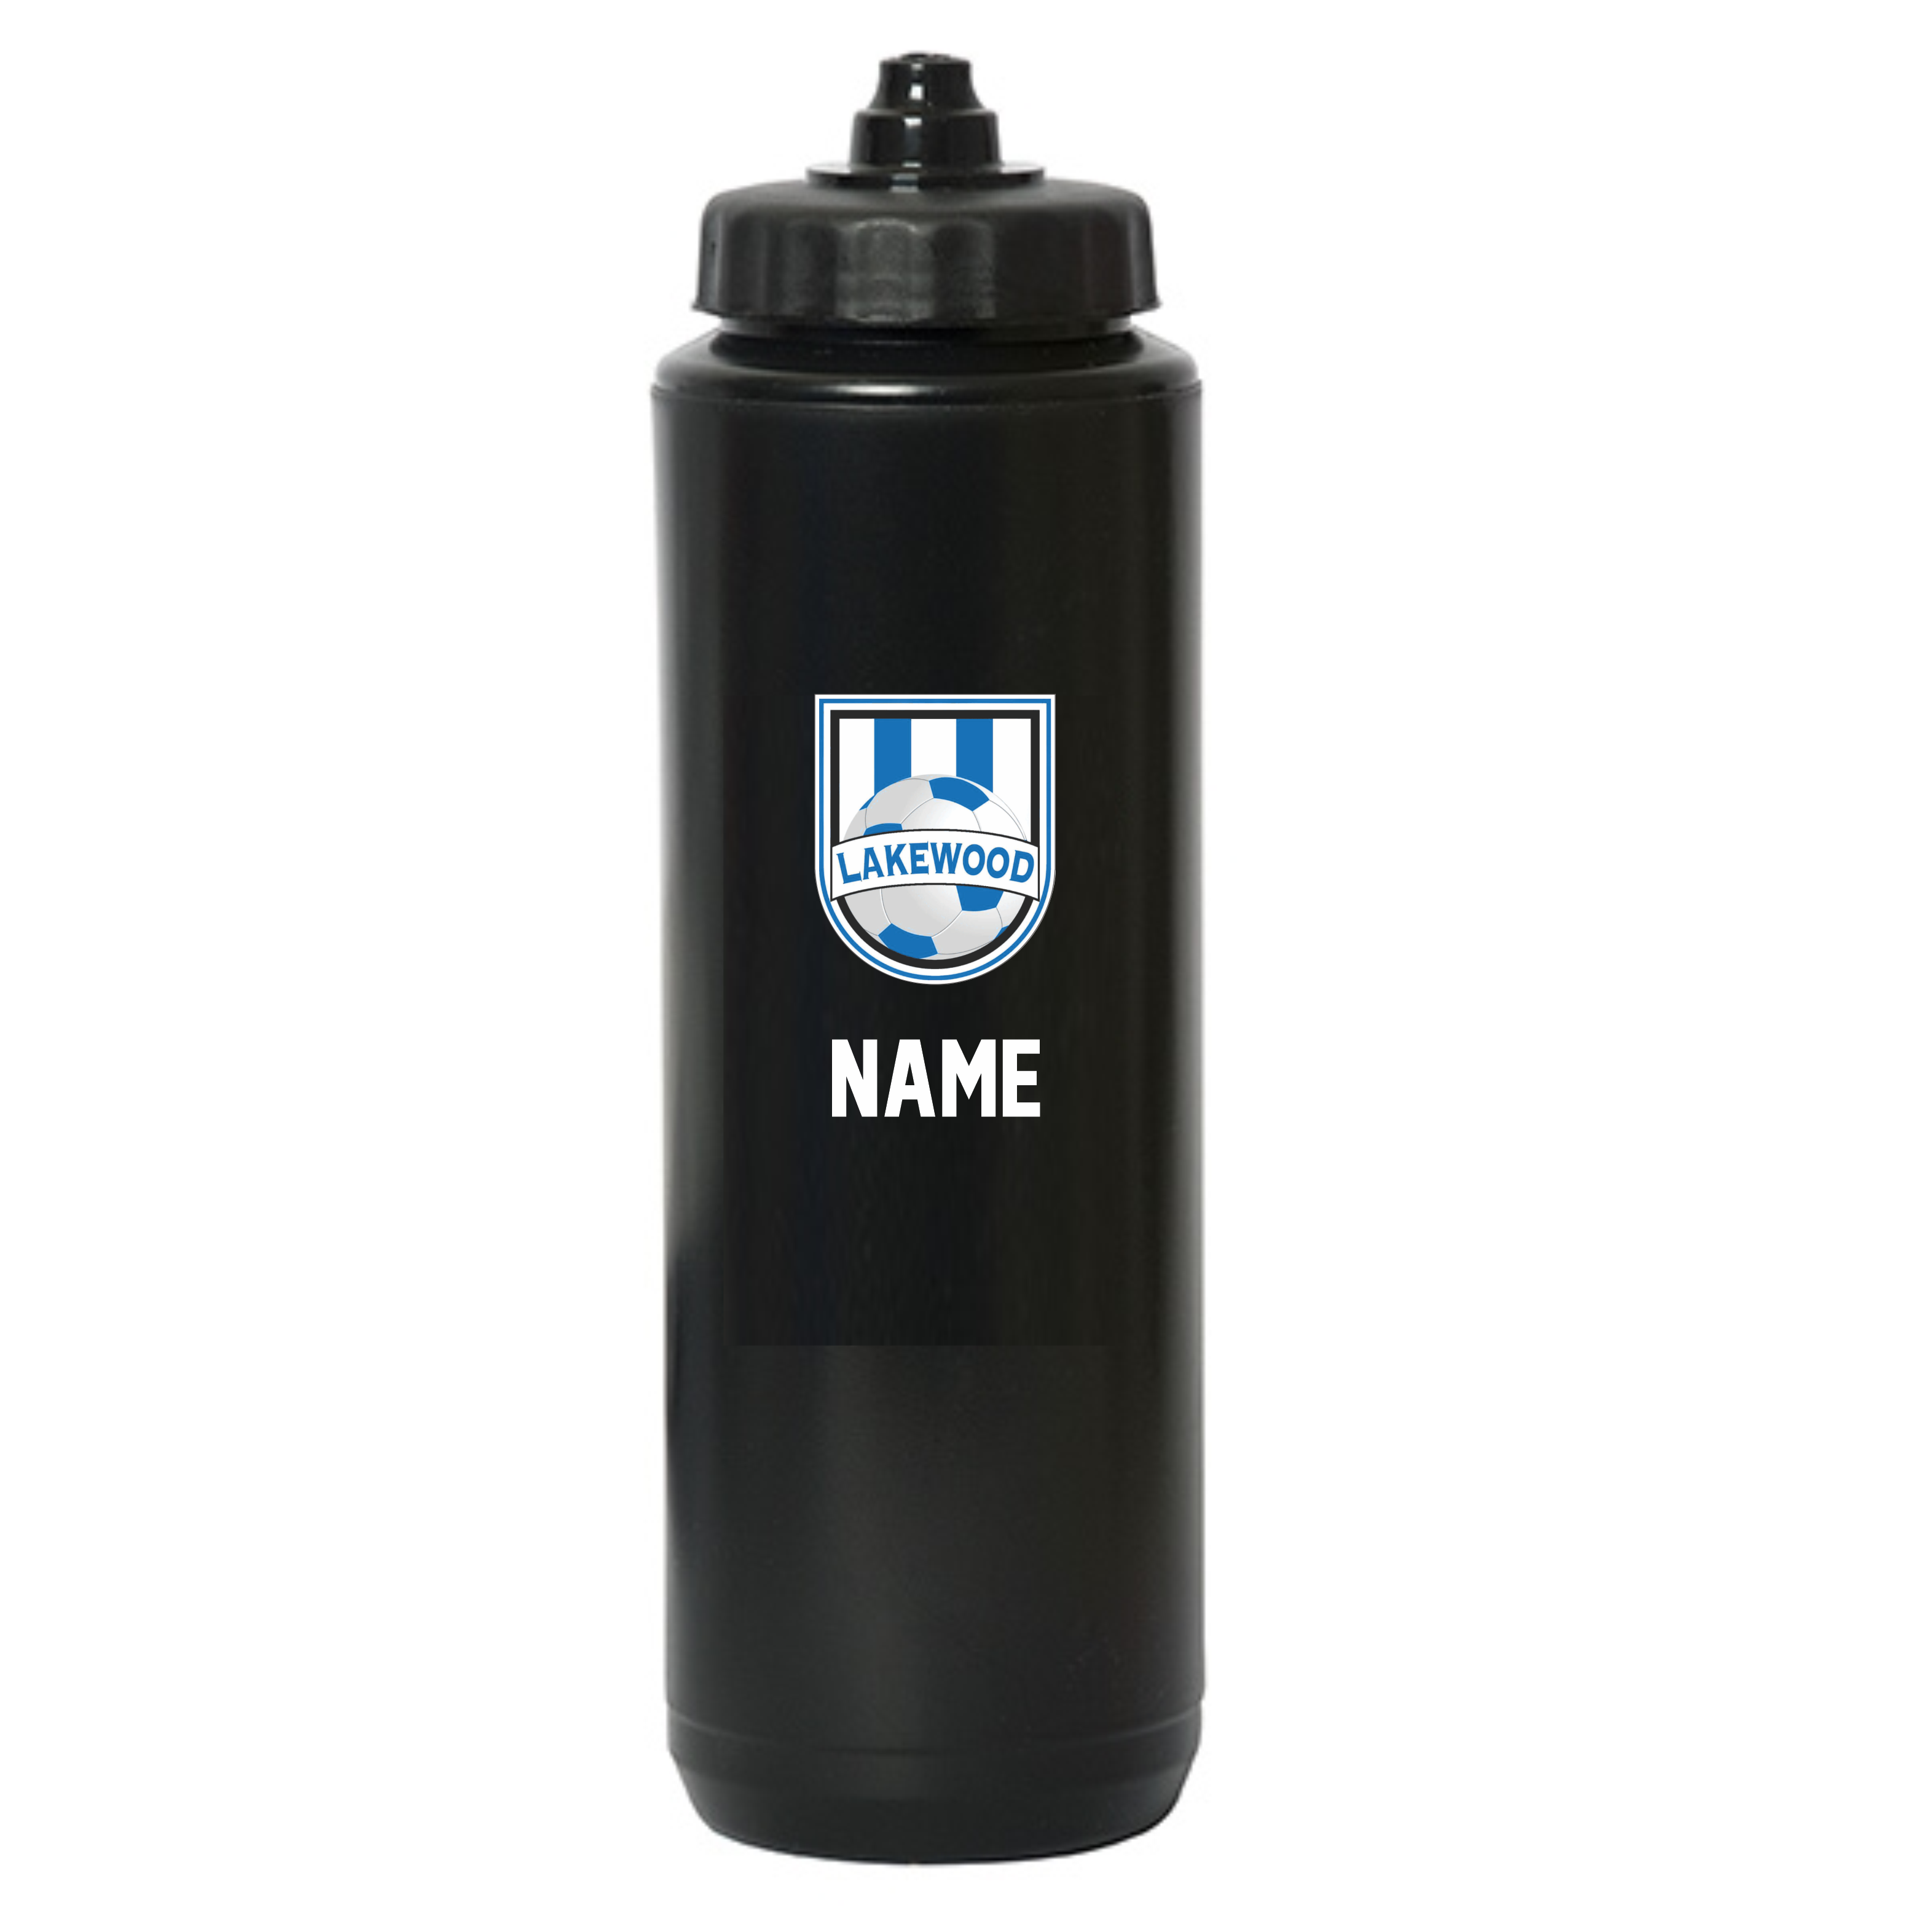 Lakewood CP Squeeze Water Bottle